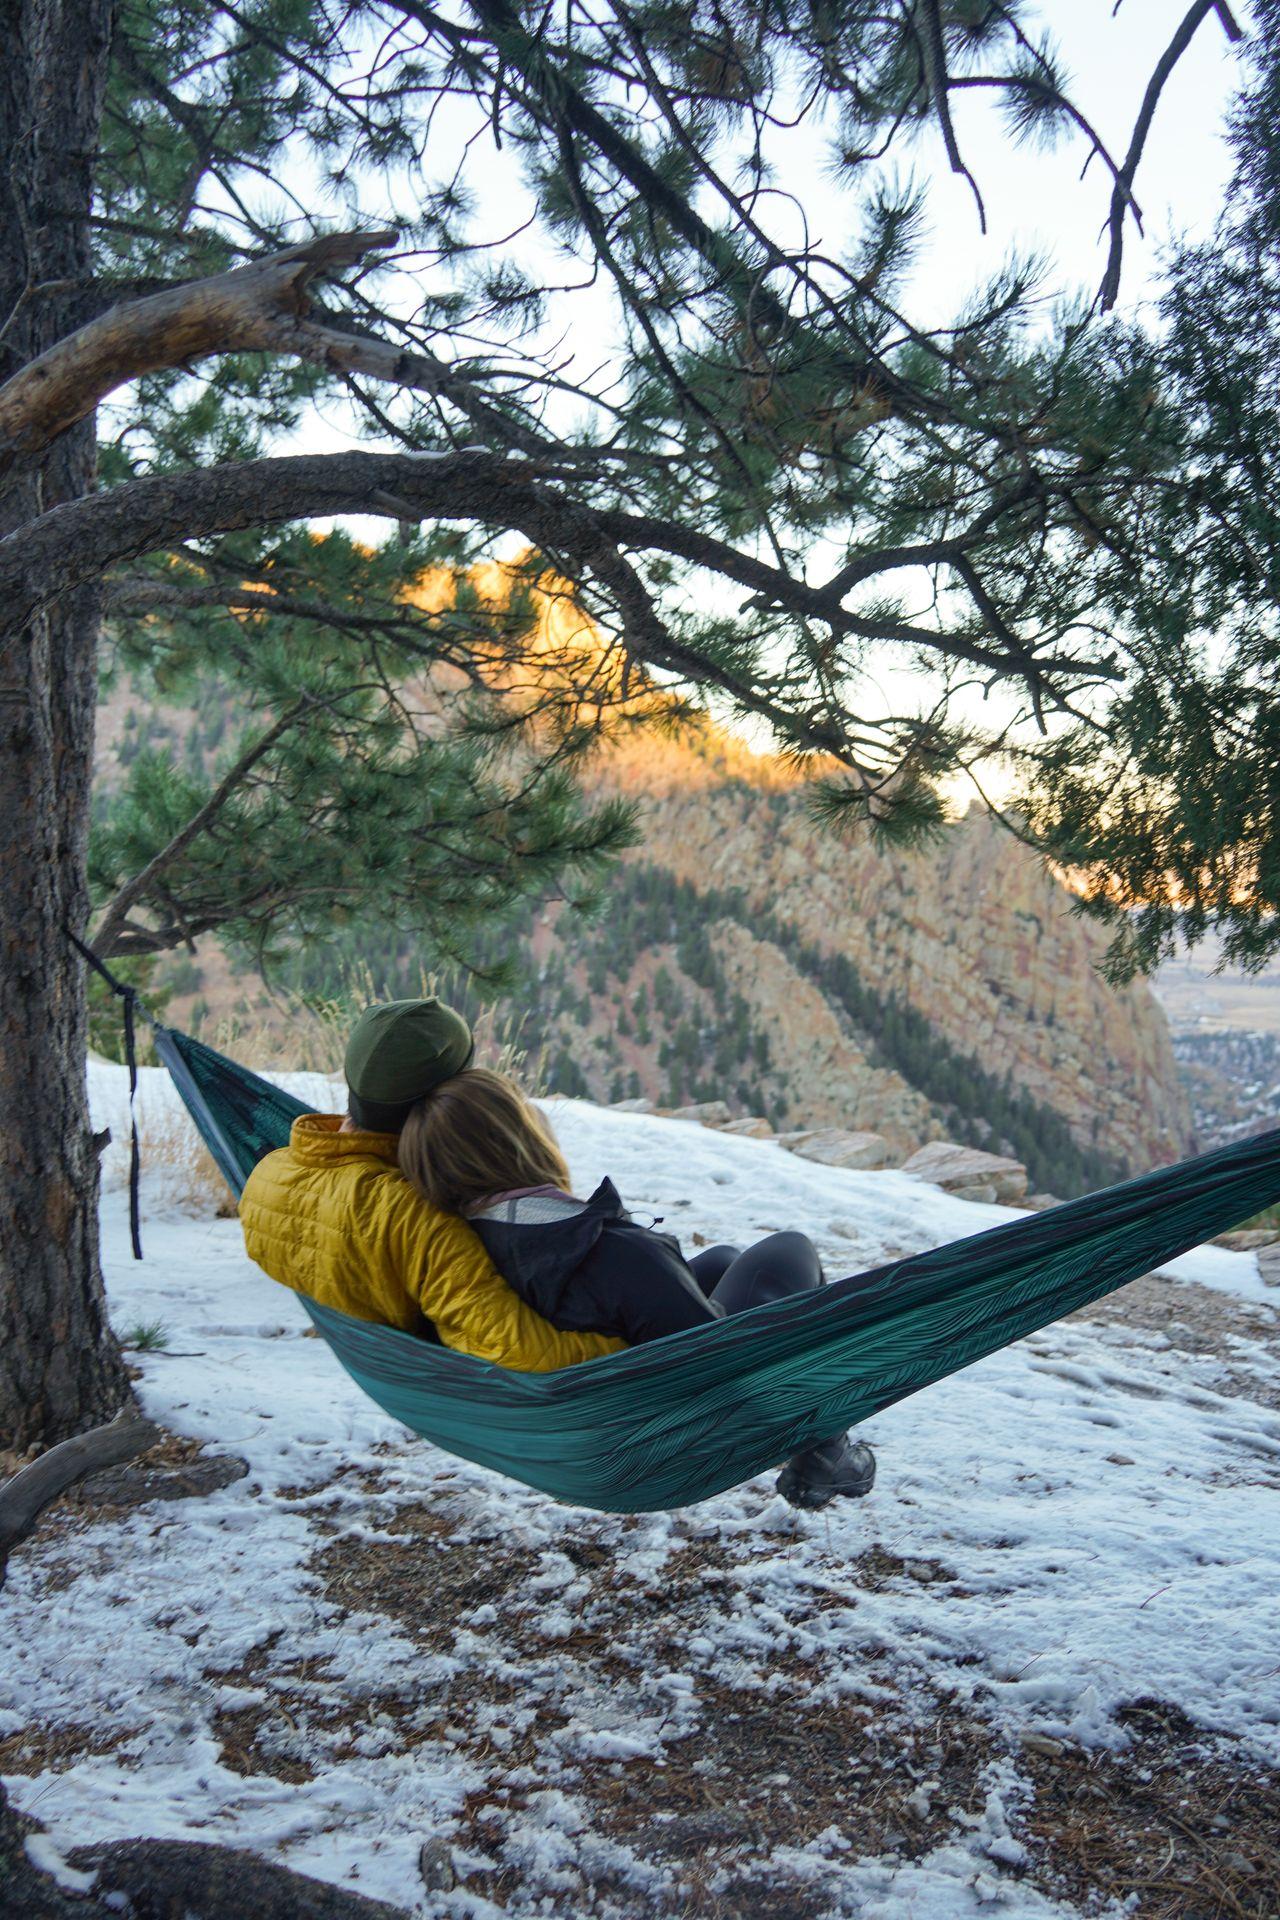 Lydia and Joe sitting in a hammock and looking out a sunsest with snow on the ground.